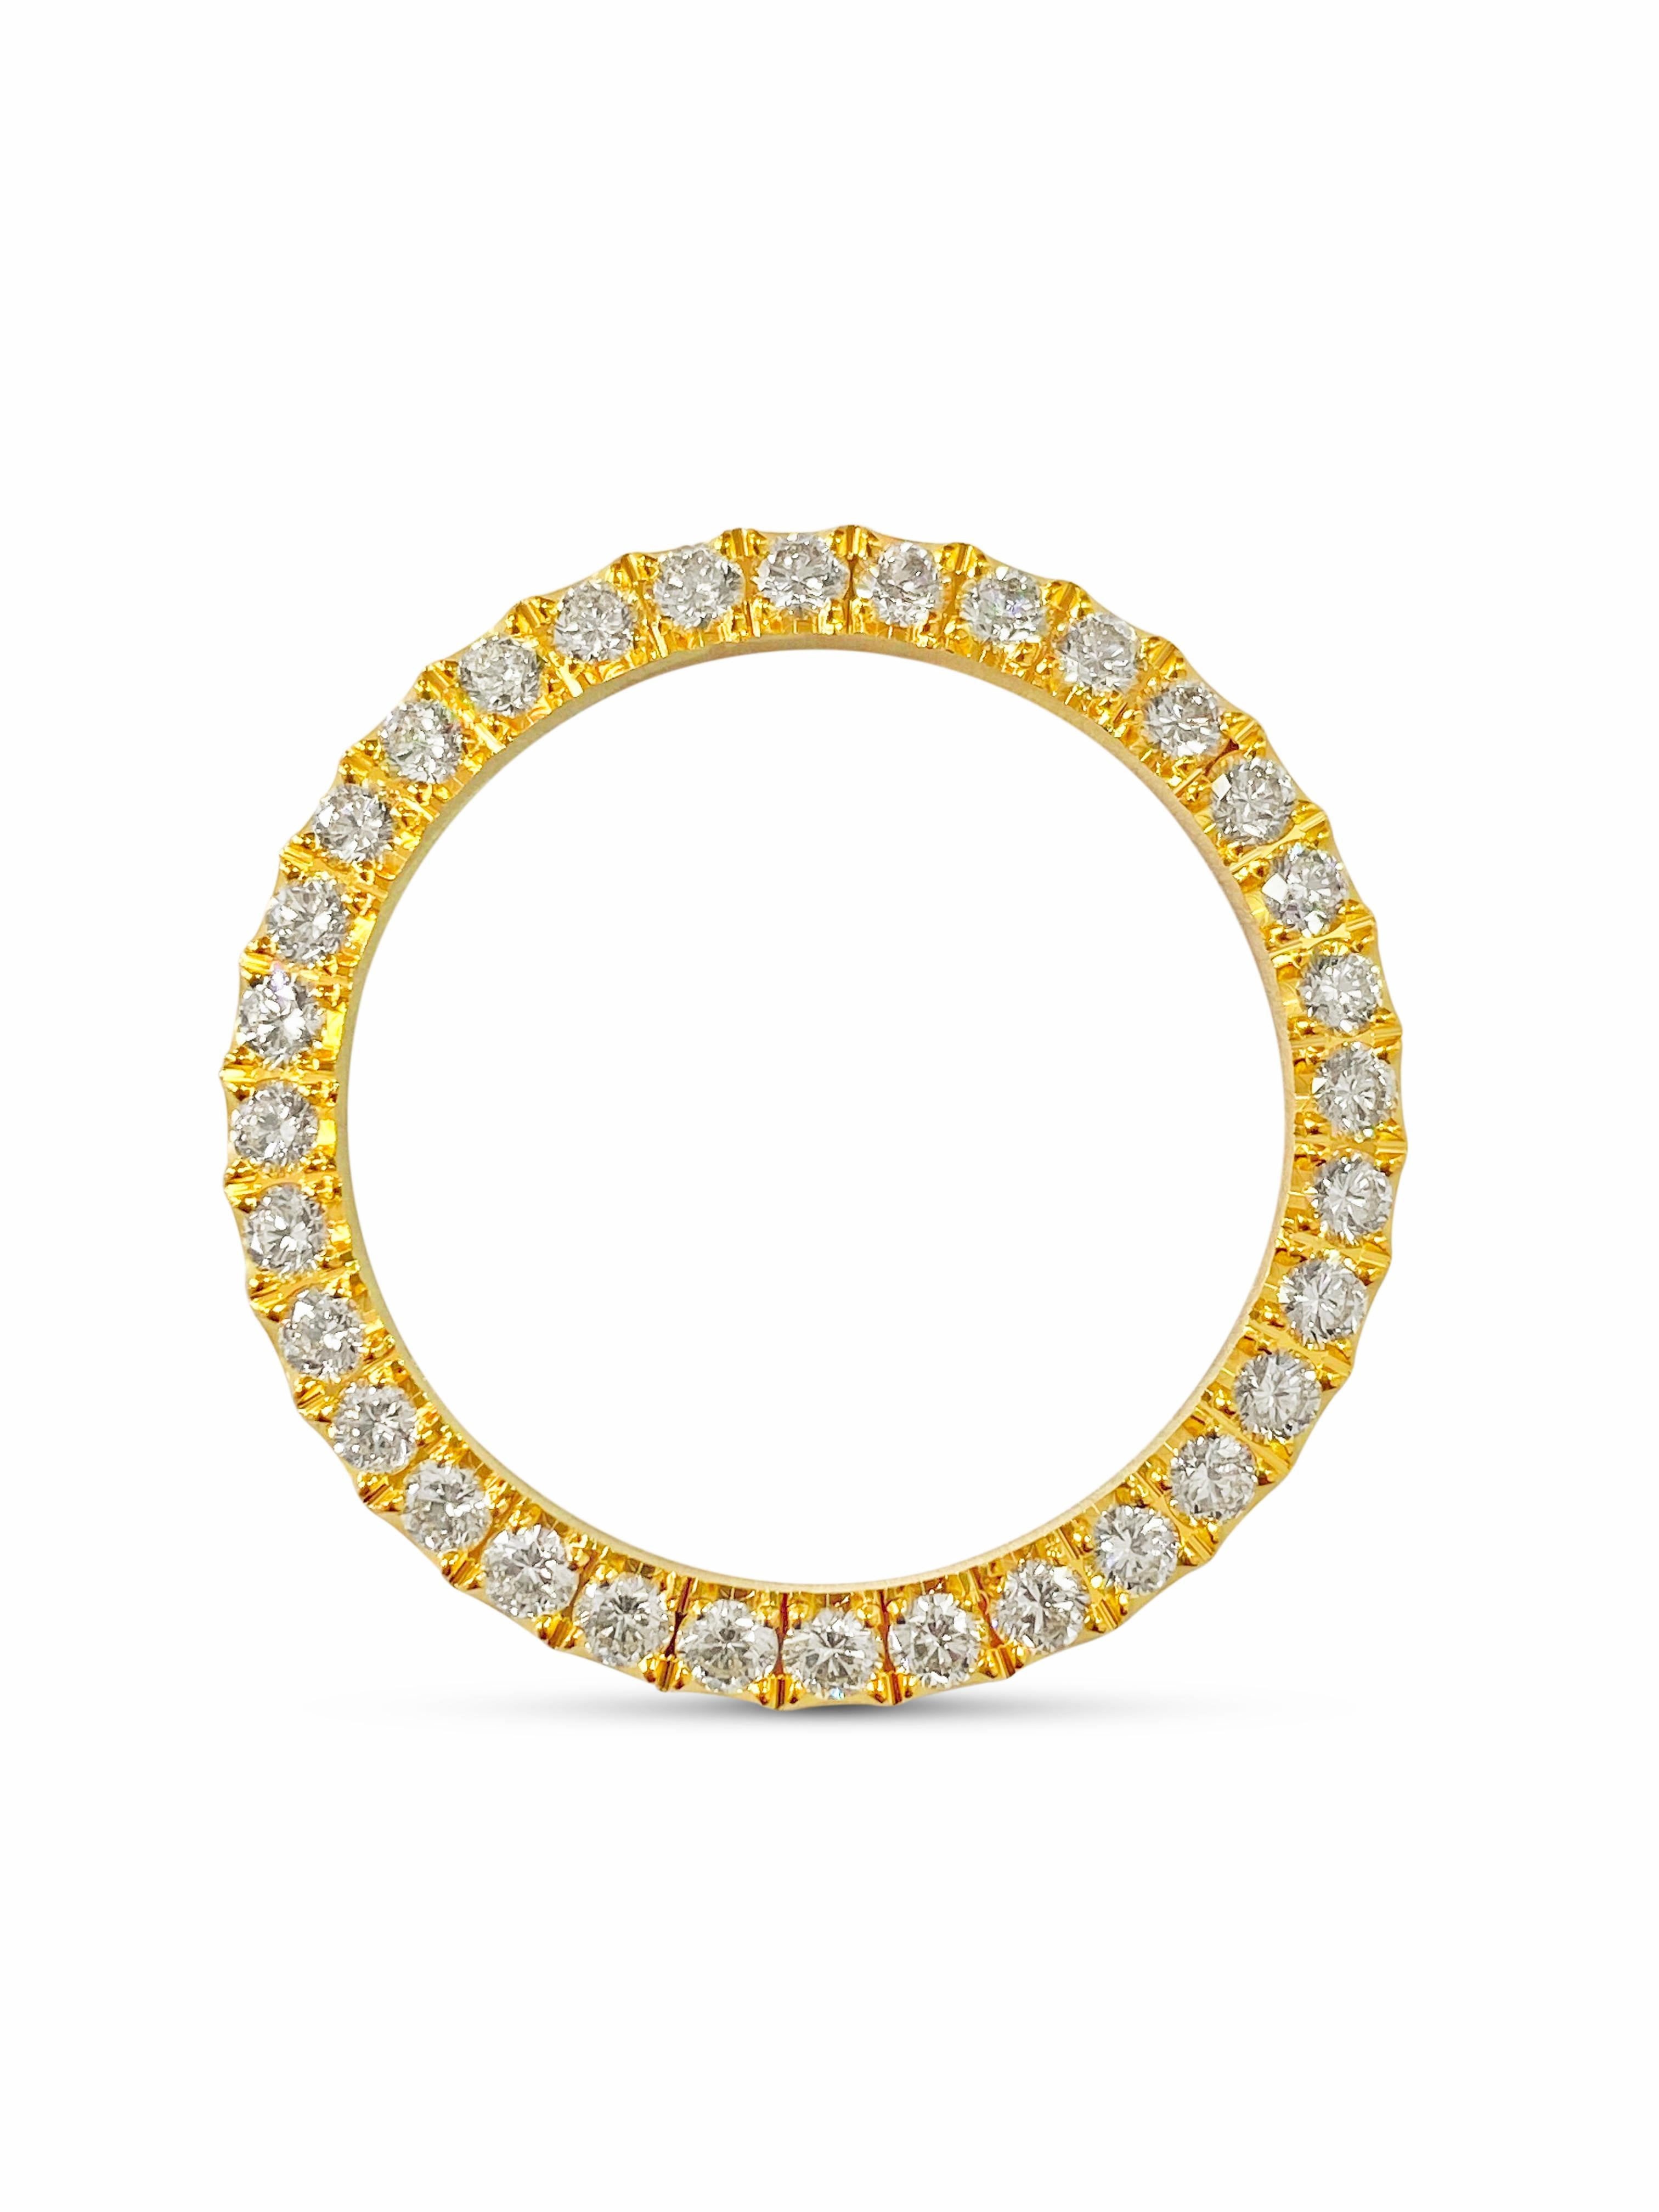 Metal: 14k yellow gold. 

Diamonds: 3.90cwt. 
VVS clarity and H color. 
Round brilliant cut diamonds. 100% natural earth mined diamonds. 

36mm watch bezel. Perfect for Rolex Datejust Oyster Perpetual. 
